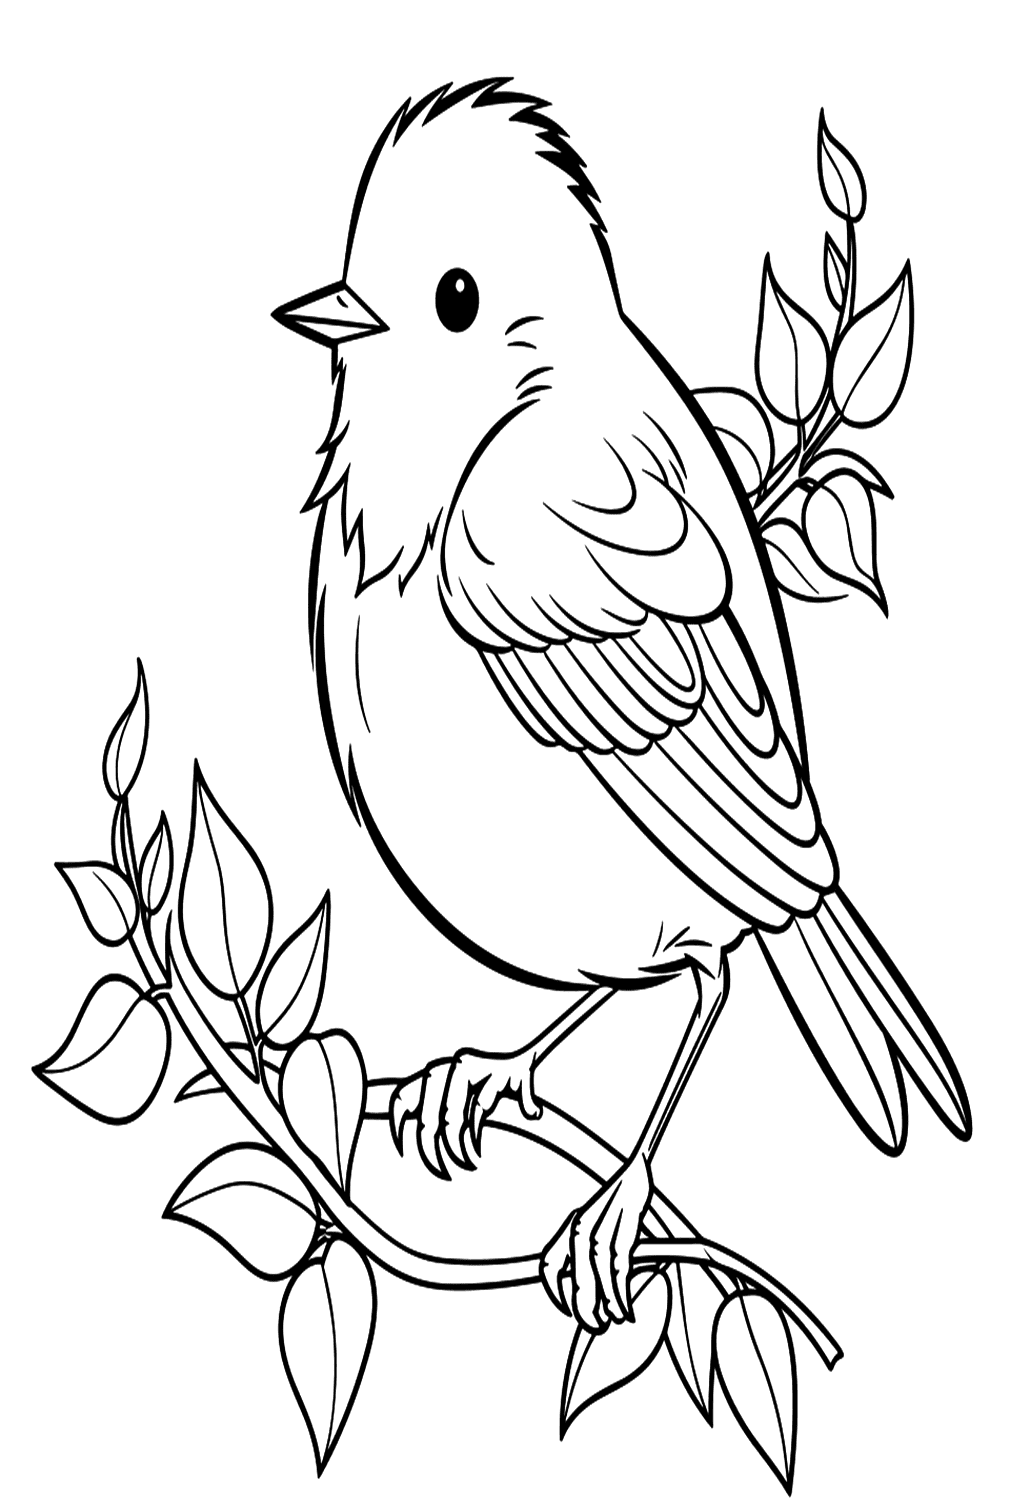 Nightingale Coloring Page For Kids - Free Printable Coloring Pages